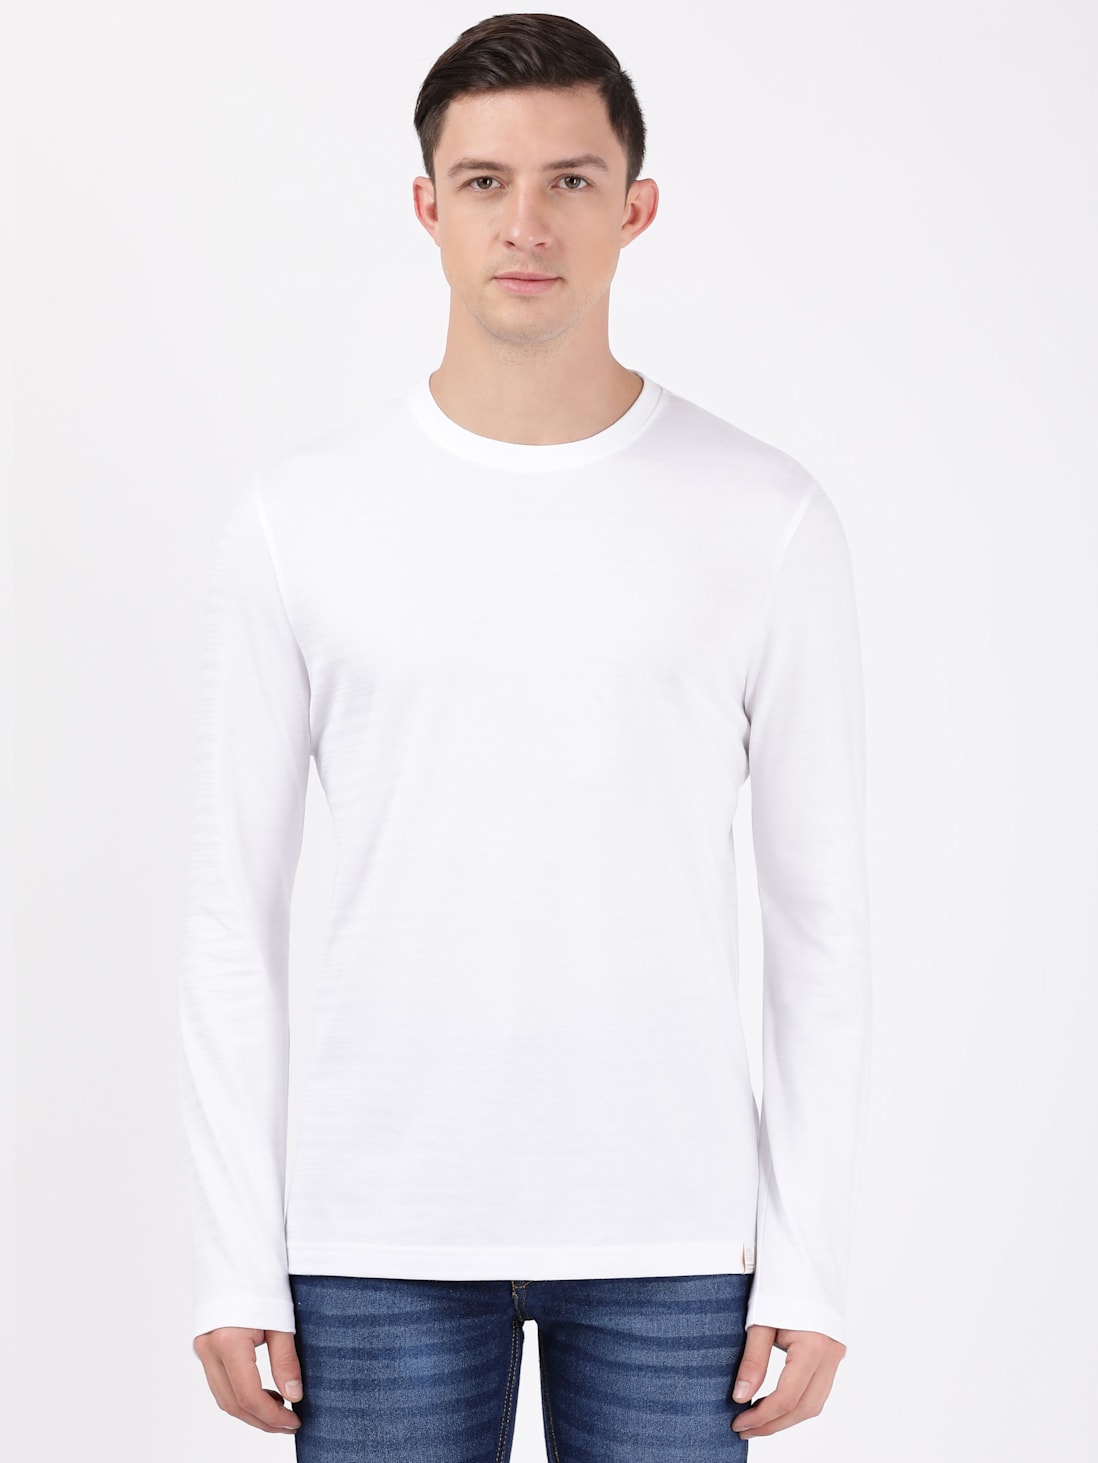 Buy Men's Super Combed Supima Cotton Solid Round Neck Full Sleeve T ...